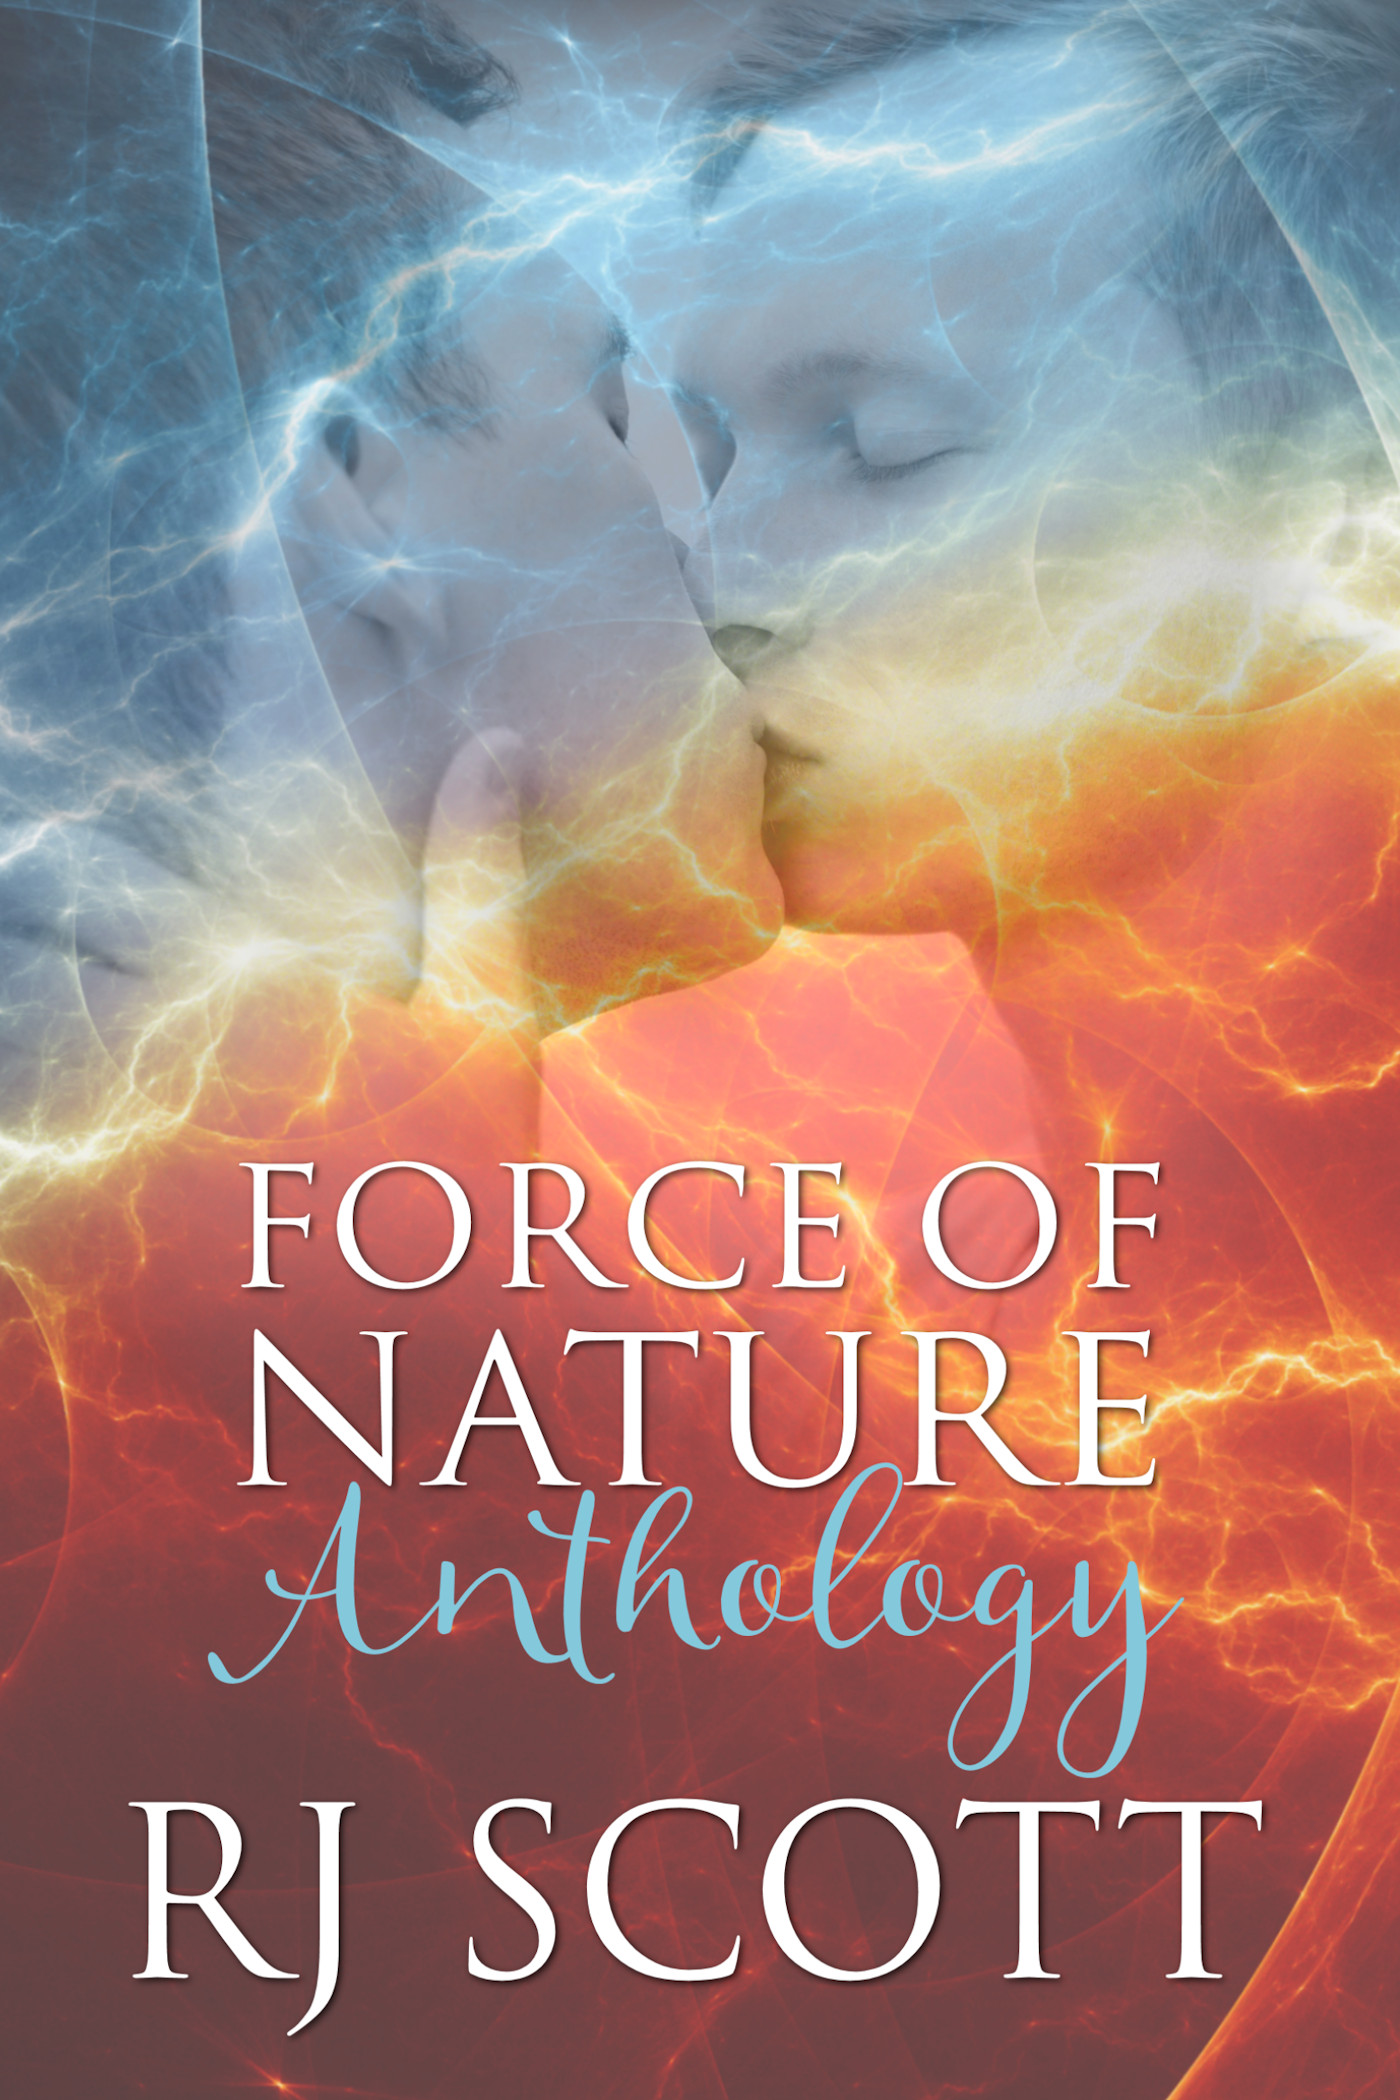 A Force of Nature by Richard Reeves